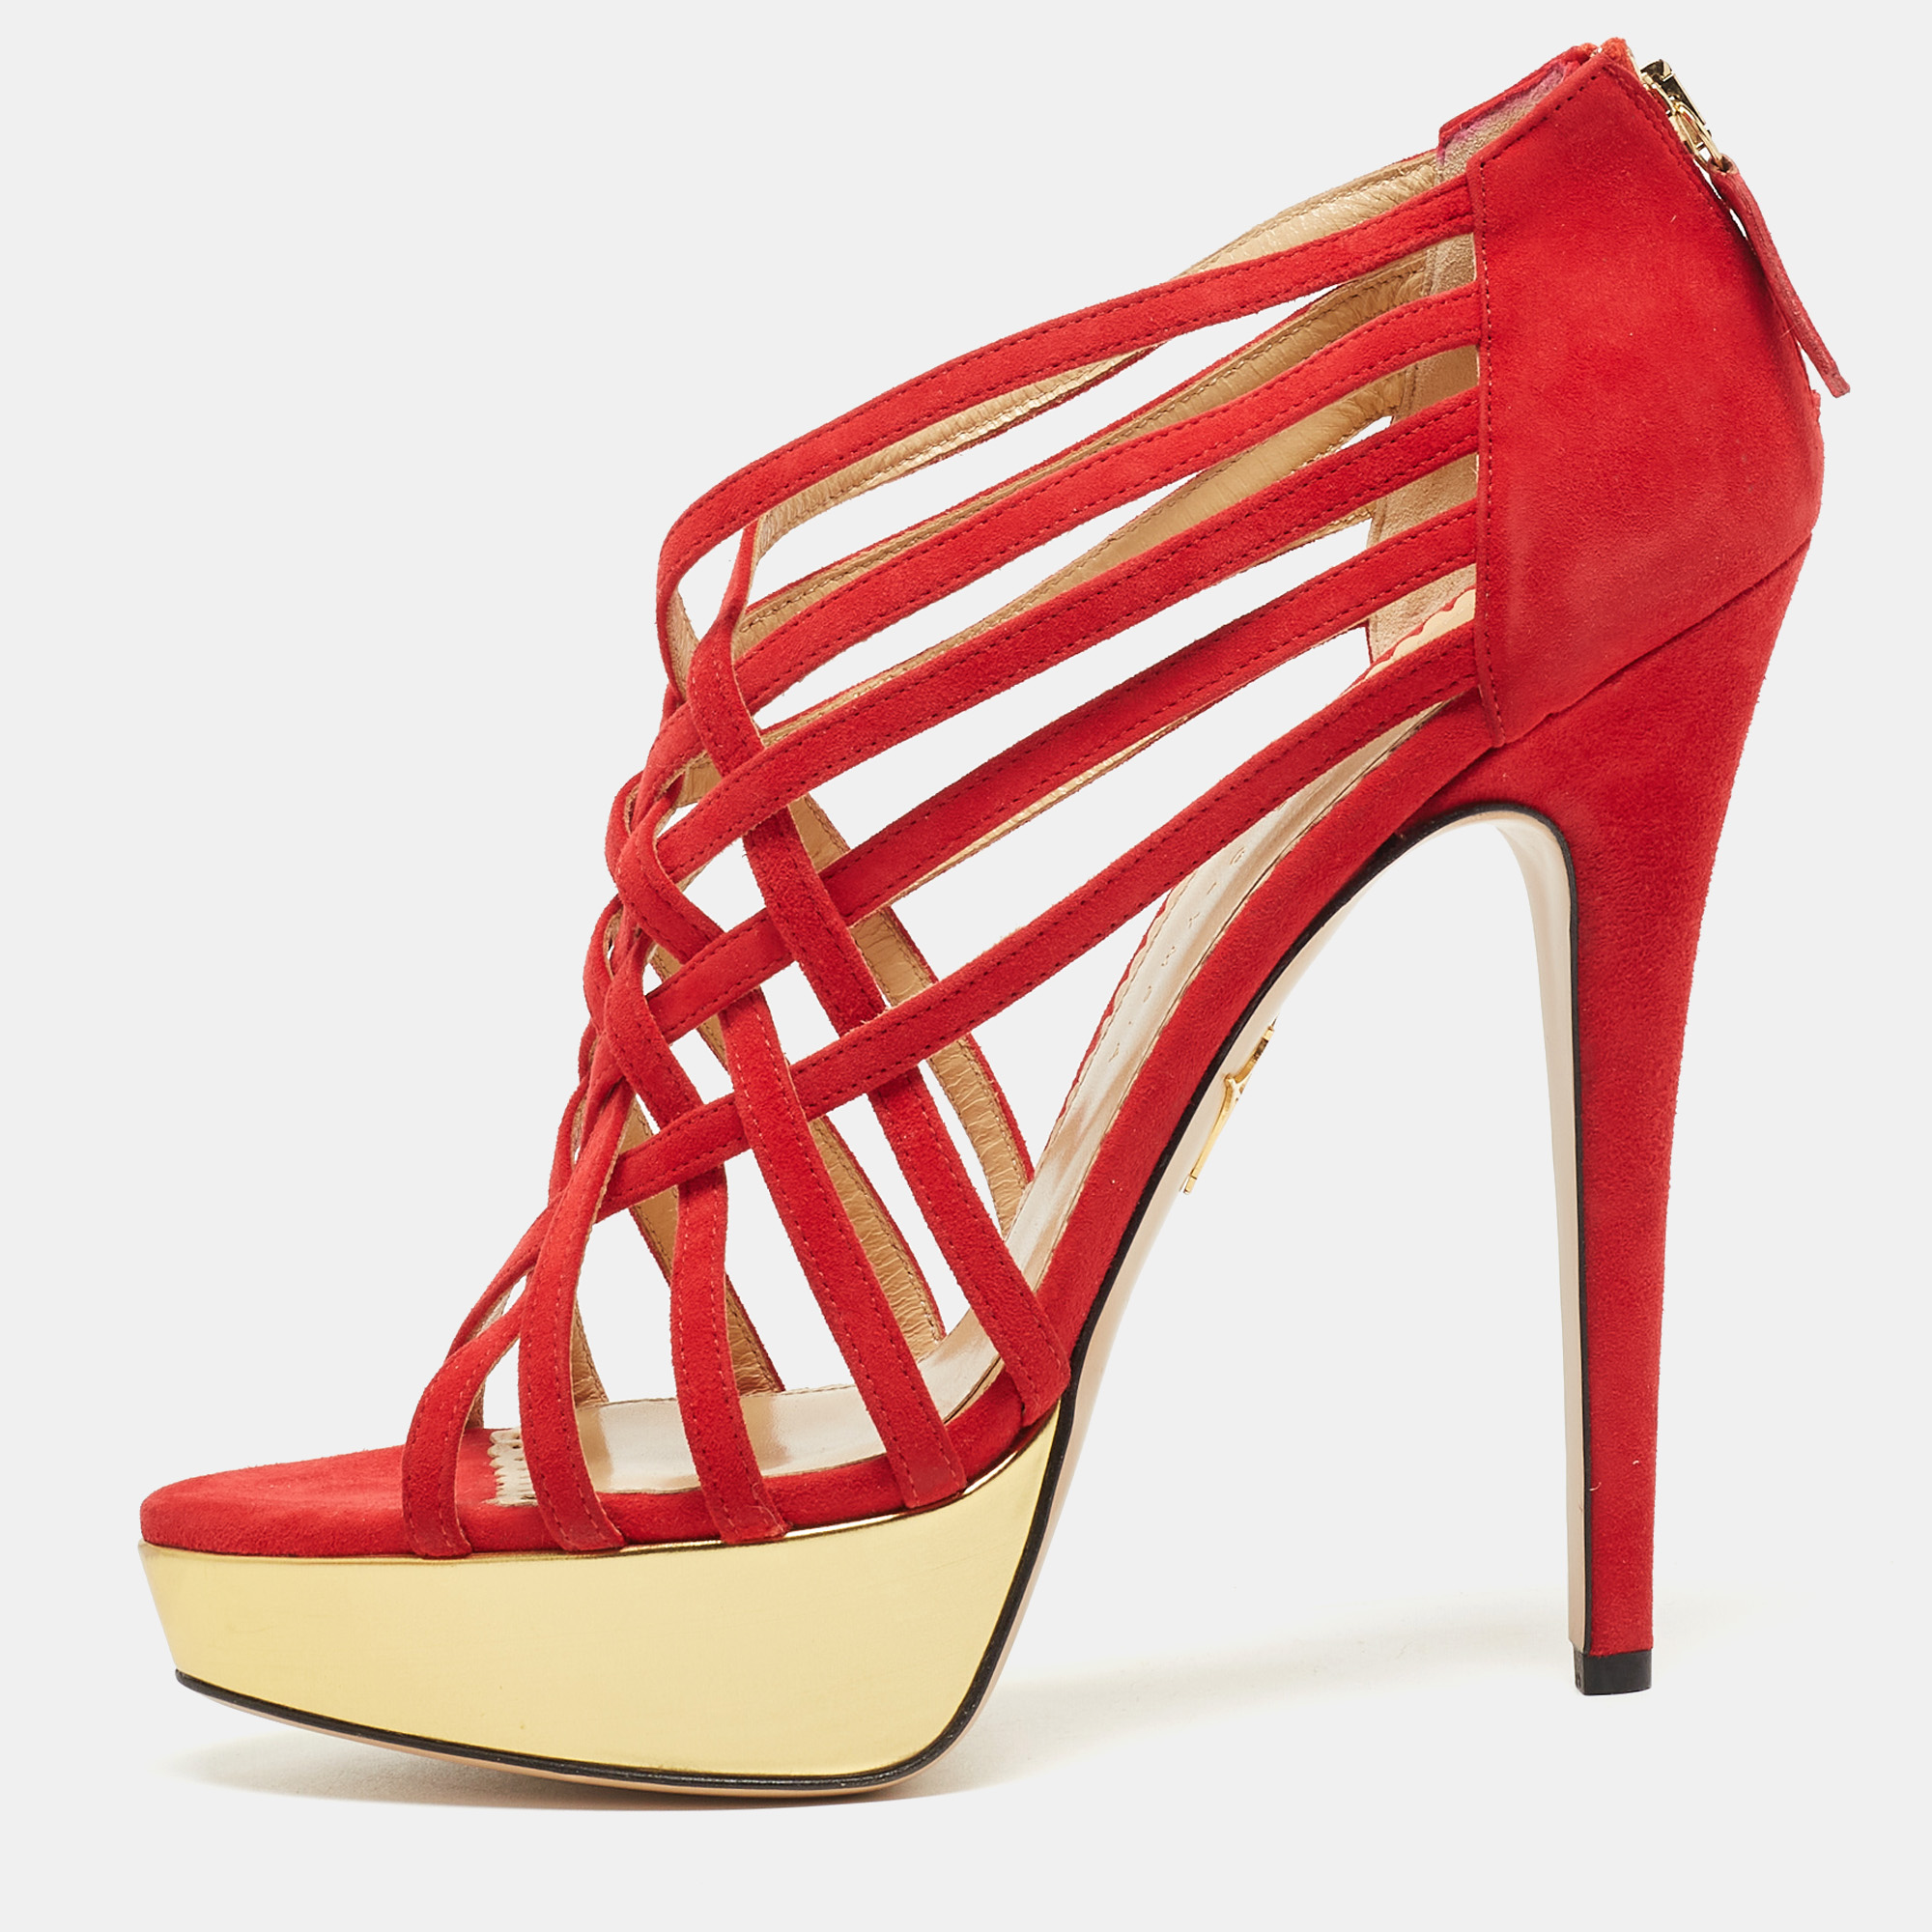 Pre-owned Charlotte Olympia Red Suede Strappy Platform Sandals Size 40